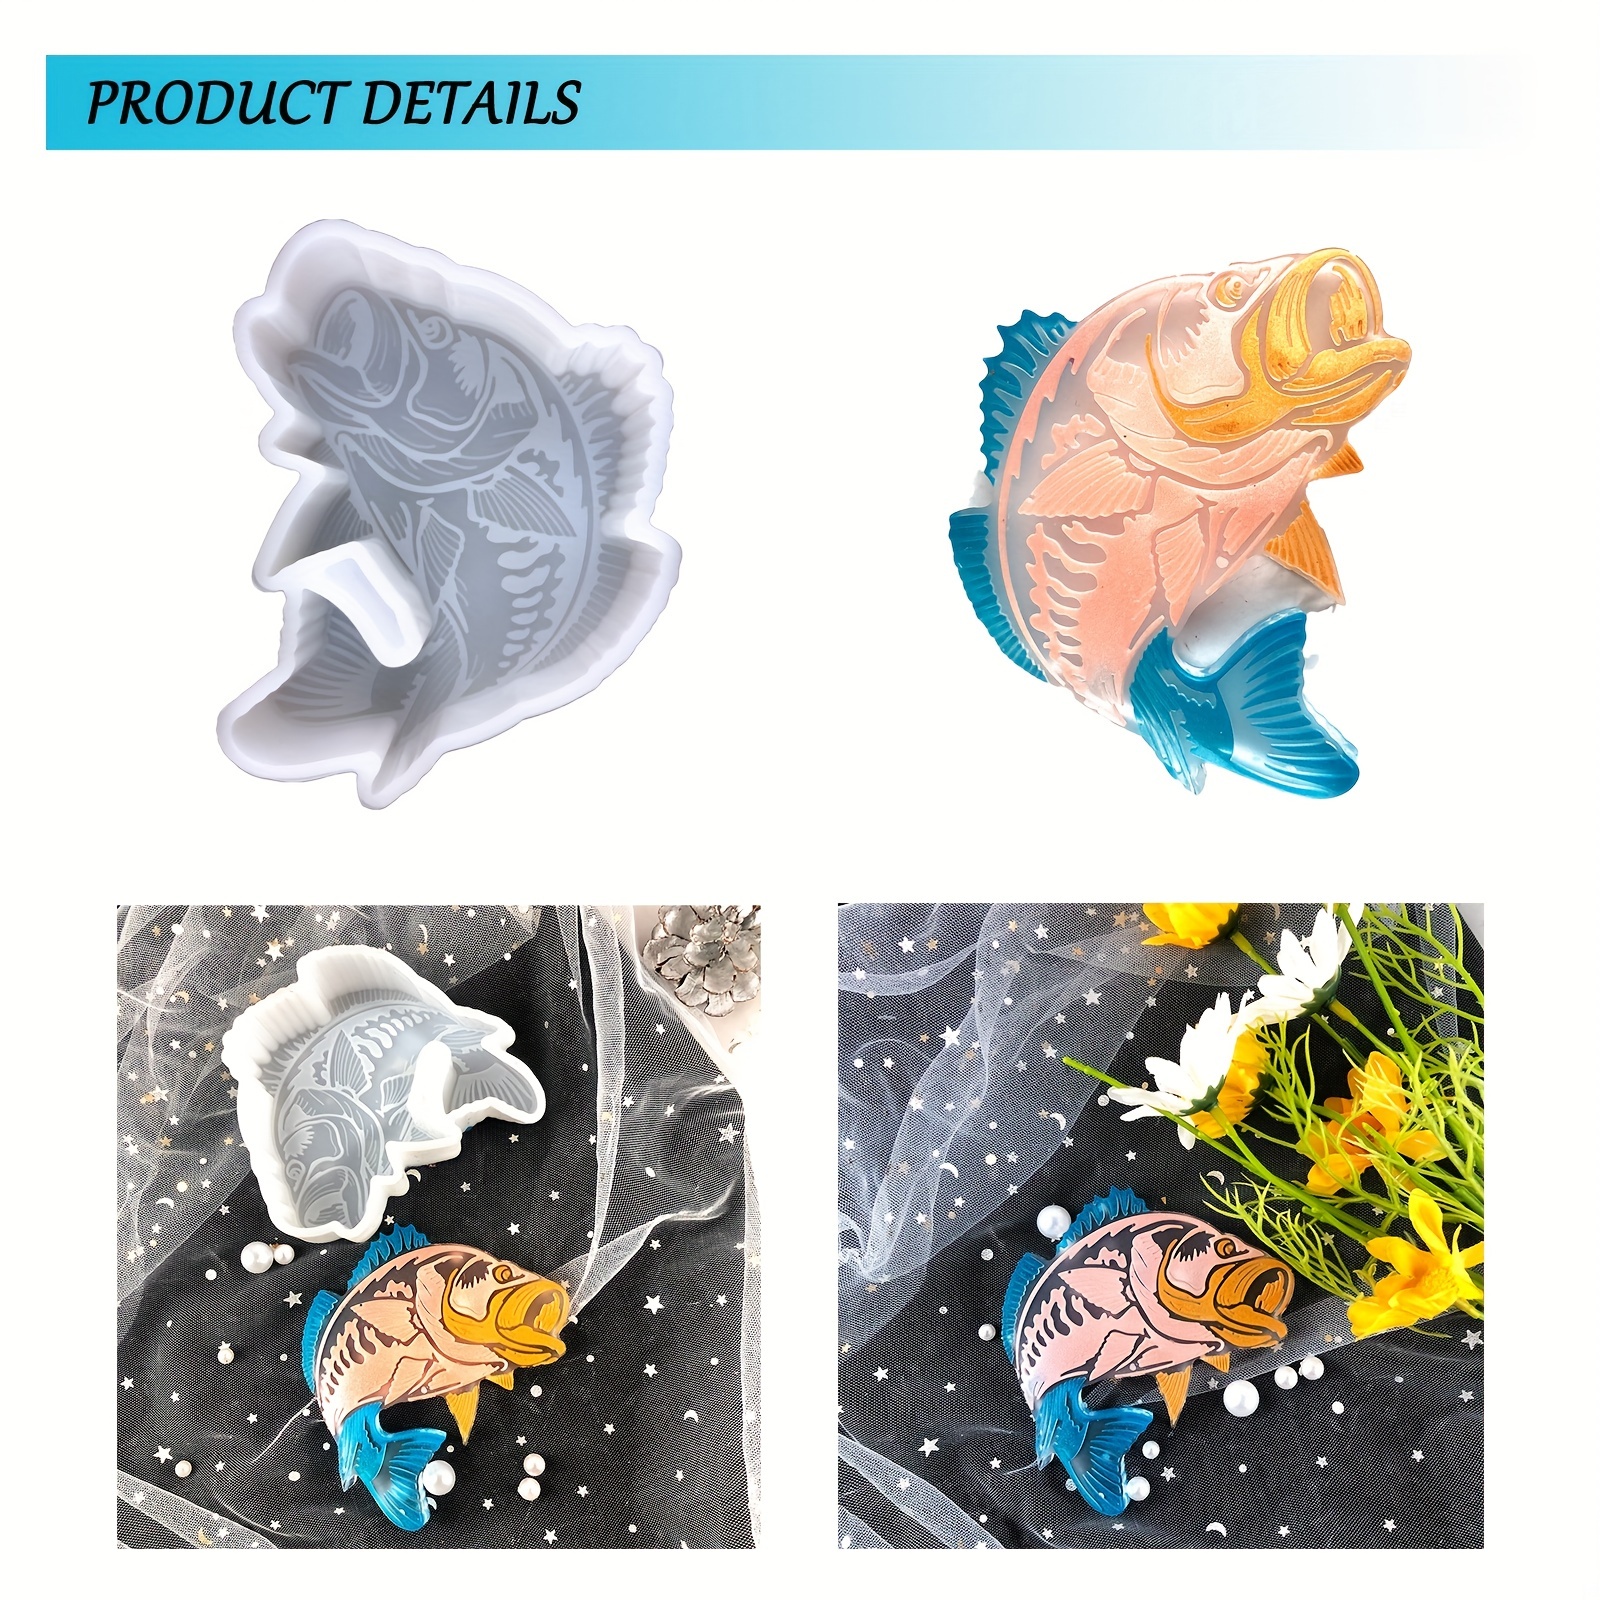 Patterned Turtle Car Freshie Molds Silicone Molds For - Temu